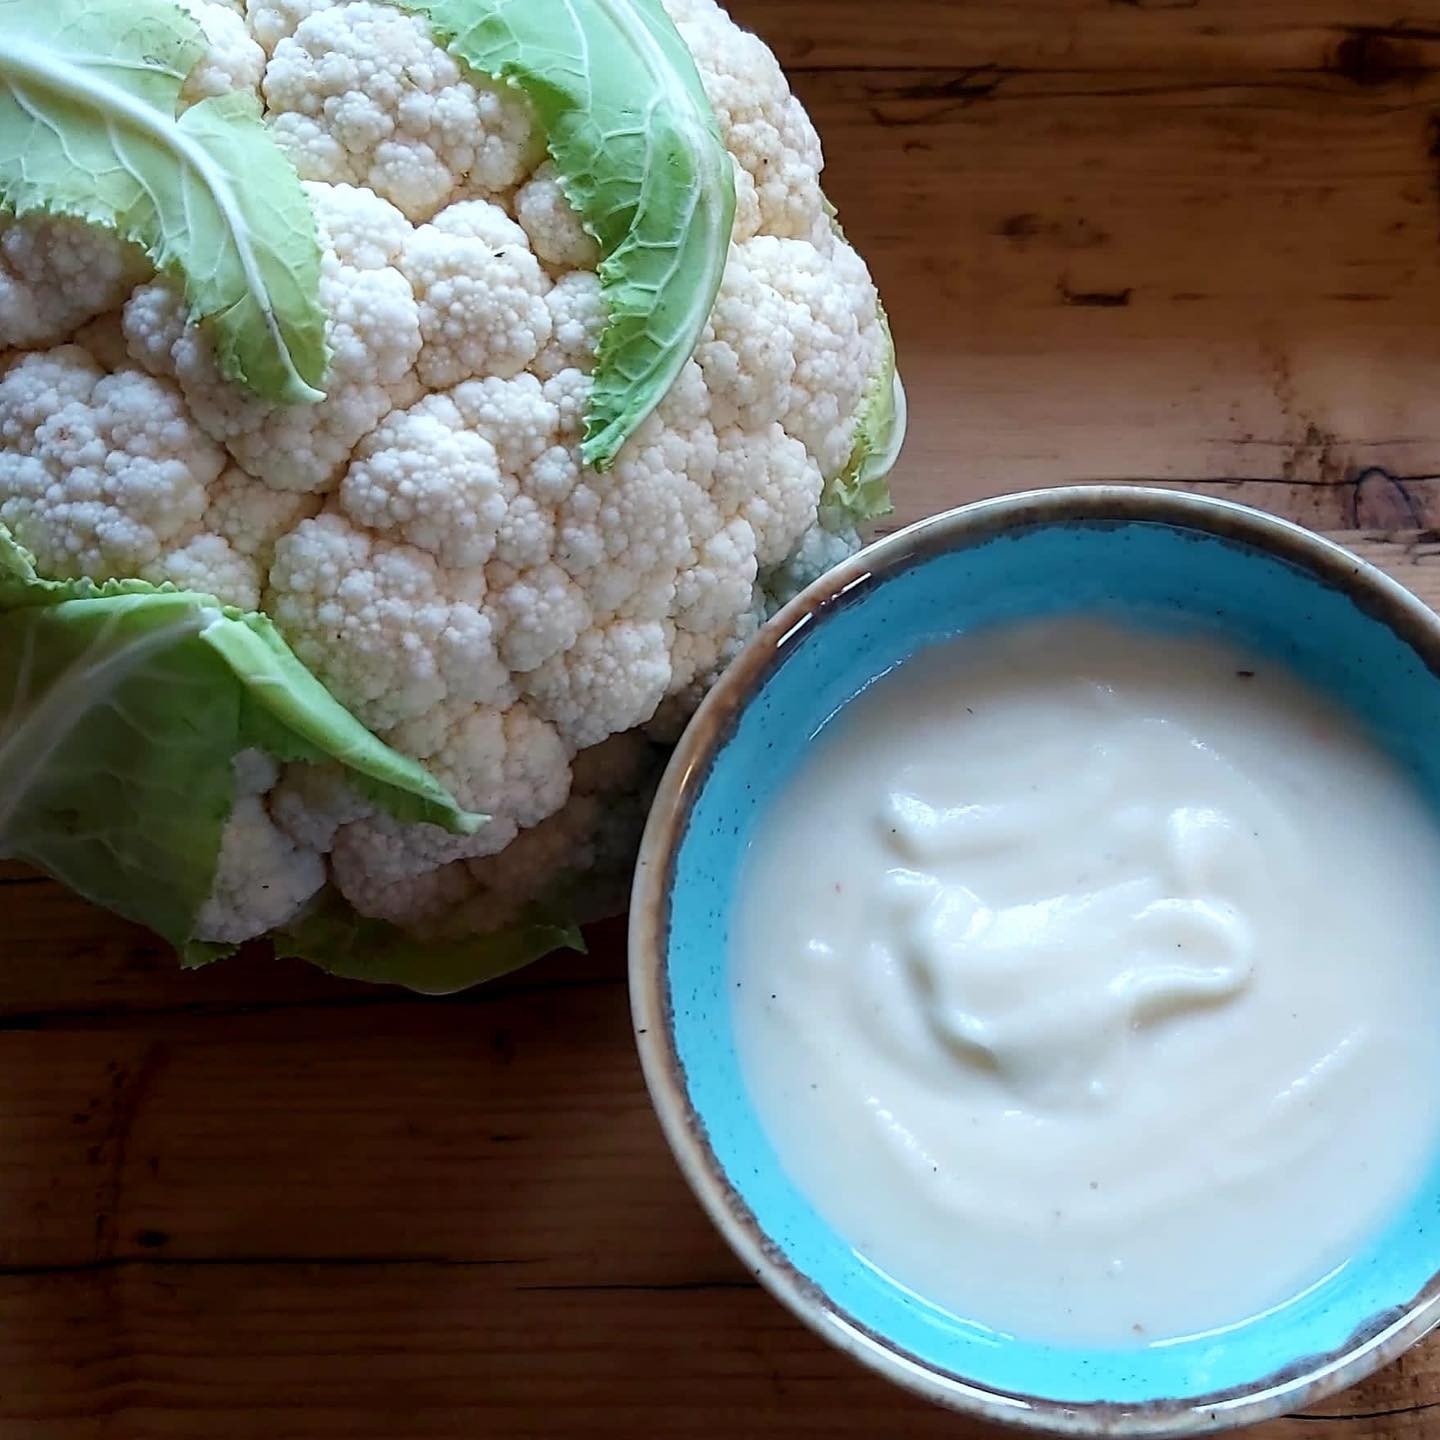 What do you call a cauliflower growing at the edge of a garden? 

A border-cauli!

This week's soup is Cauliflower and Coconut.  The perfect healthy but creamy indulgence needed (it’s Vegan too!!) 🥣🥥
.
.
.
#HeadlandsFarm #HeadlandsFarmCoffeeShop #WestWellow #Romsey #HomemadeSoup #VeganSoup #Veganuary #RomseyBusiness #WhatsOnRomsey